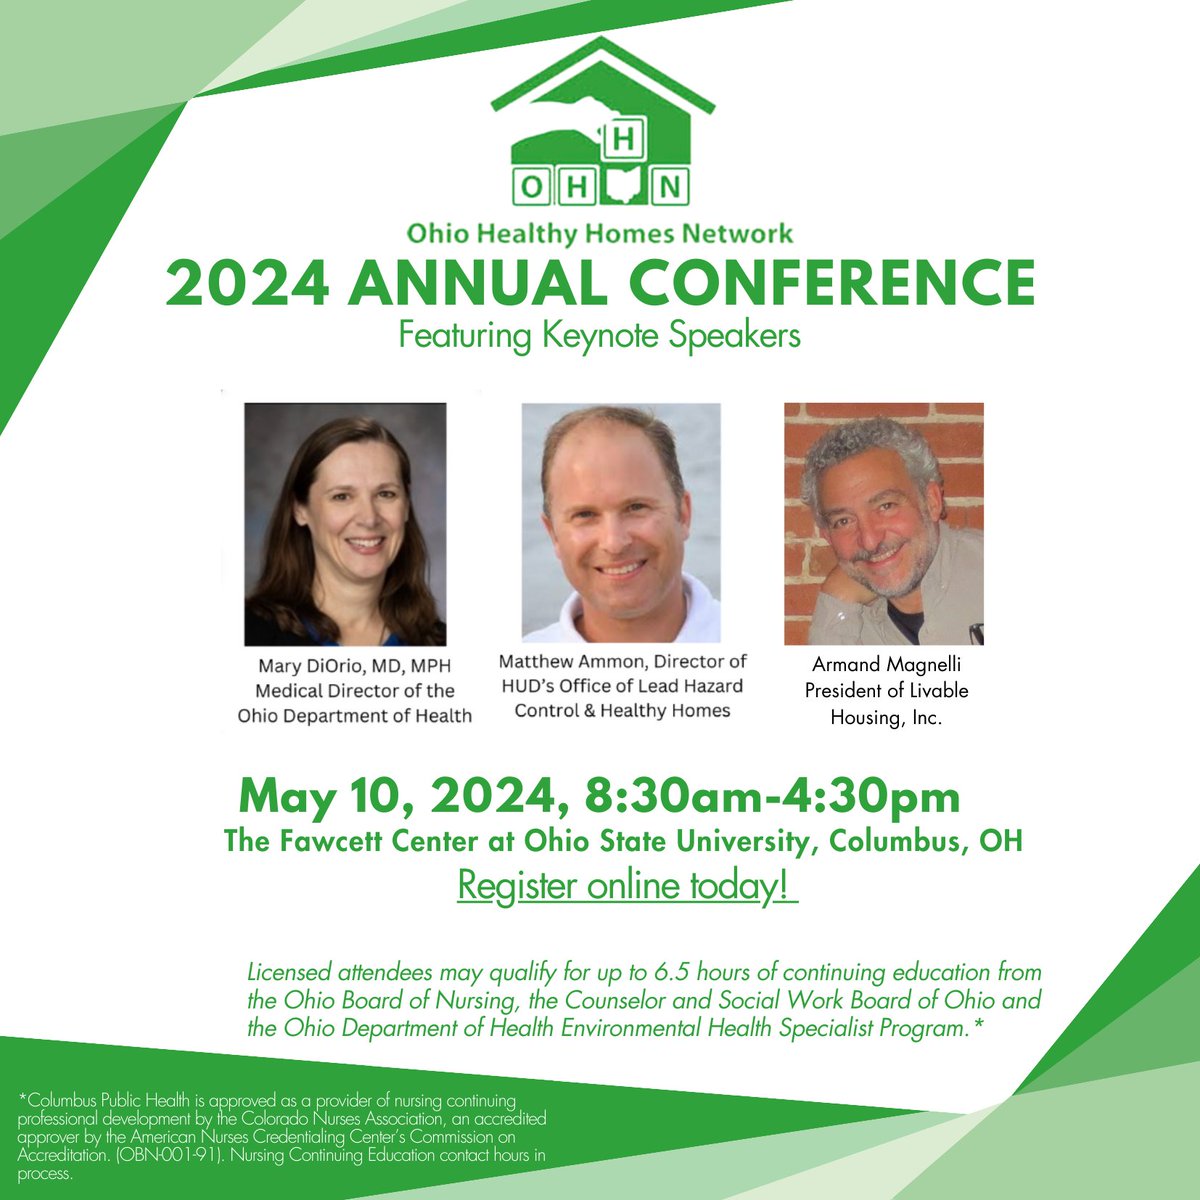 Please Join OHHN for our 2024 Annual Conference. Learn and participate in the discussion of how we collectively work to keep the homes in our communities safe from health hazards. You can register by going to our website, ohhn.org